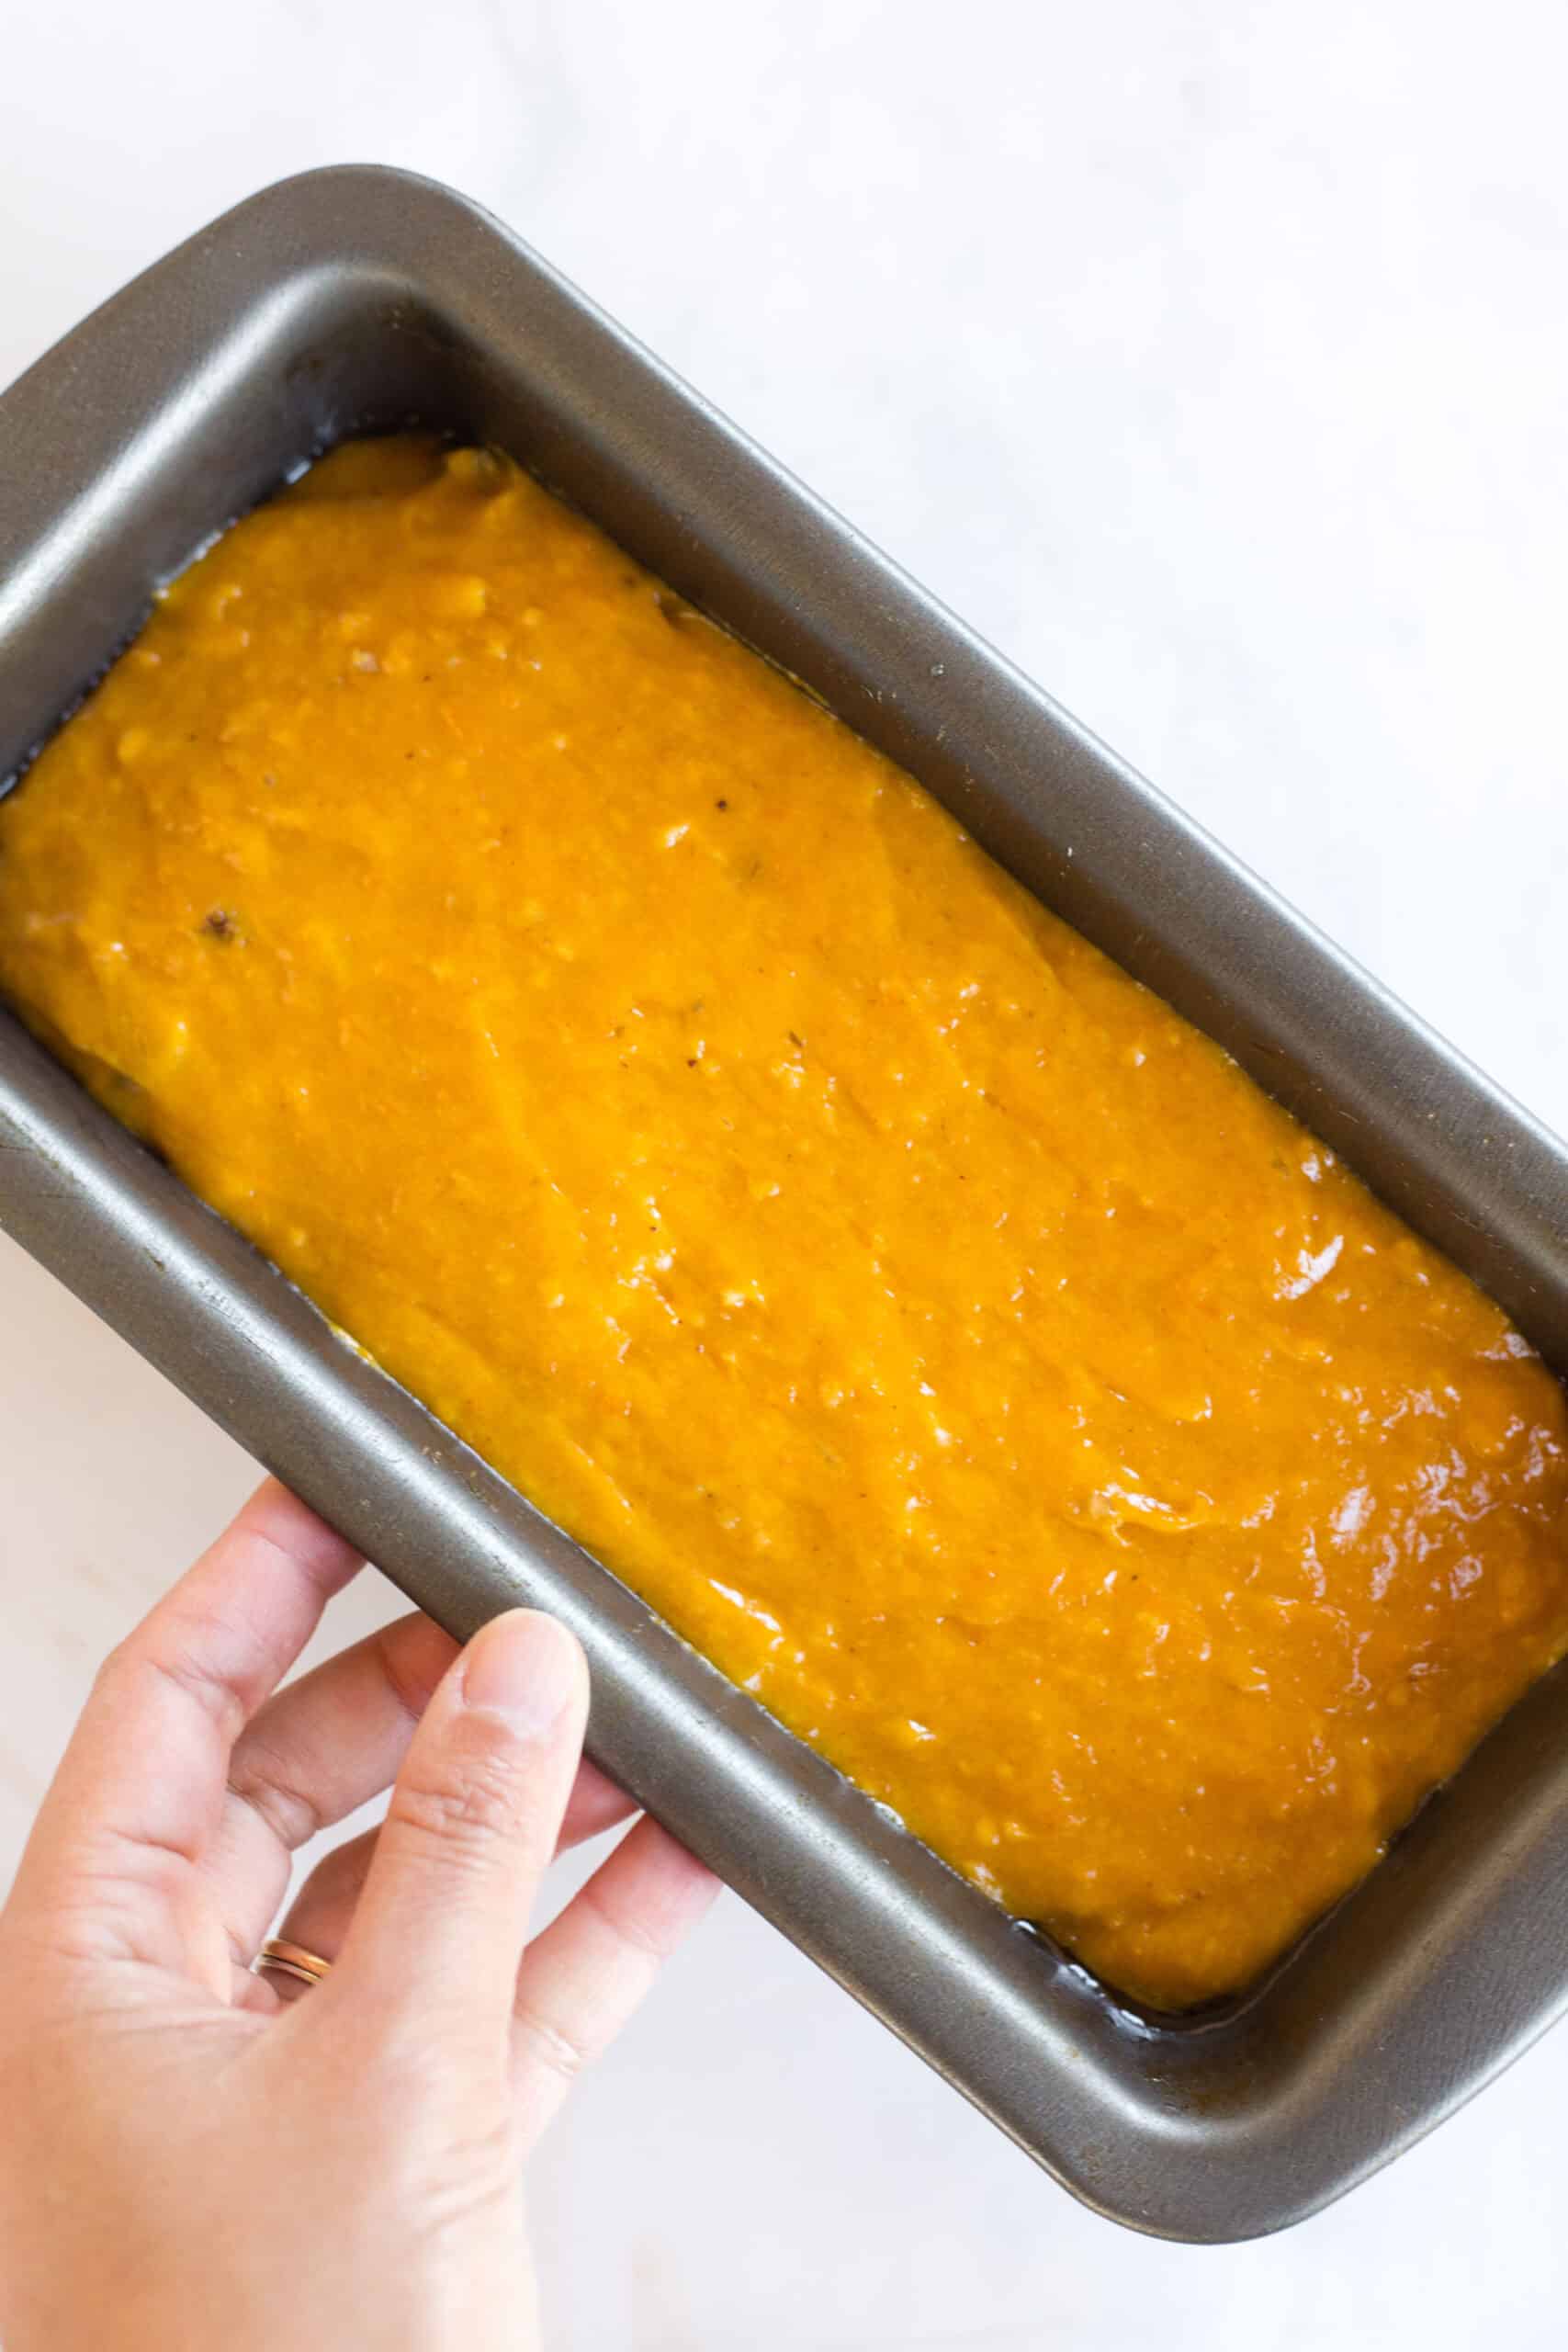 Holding a metal loaf pan with sweet potato bread batter.